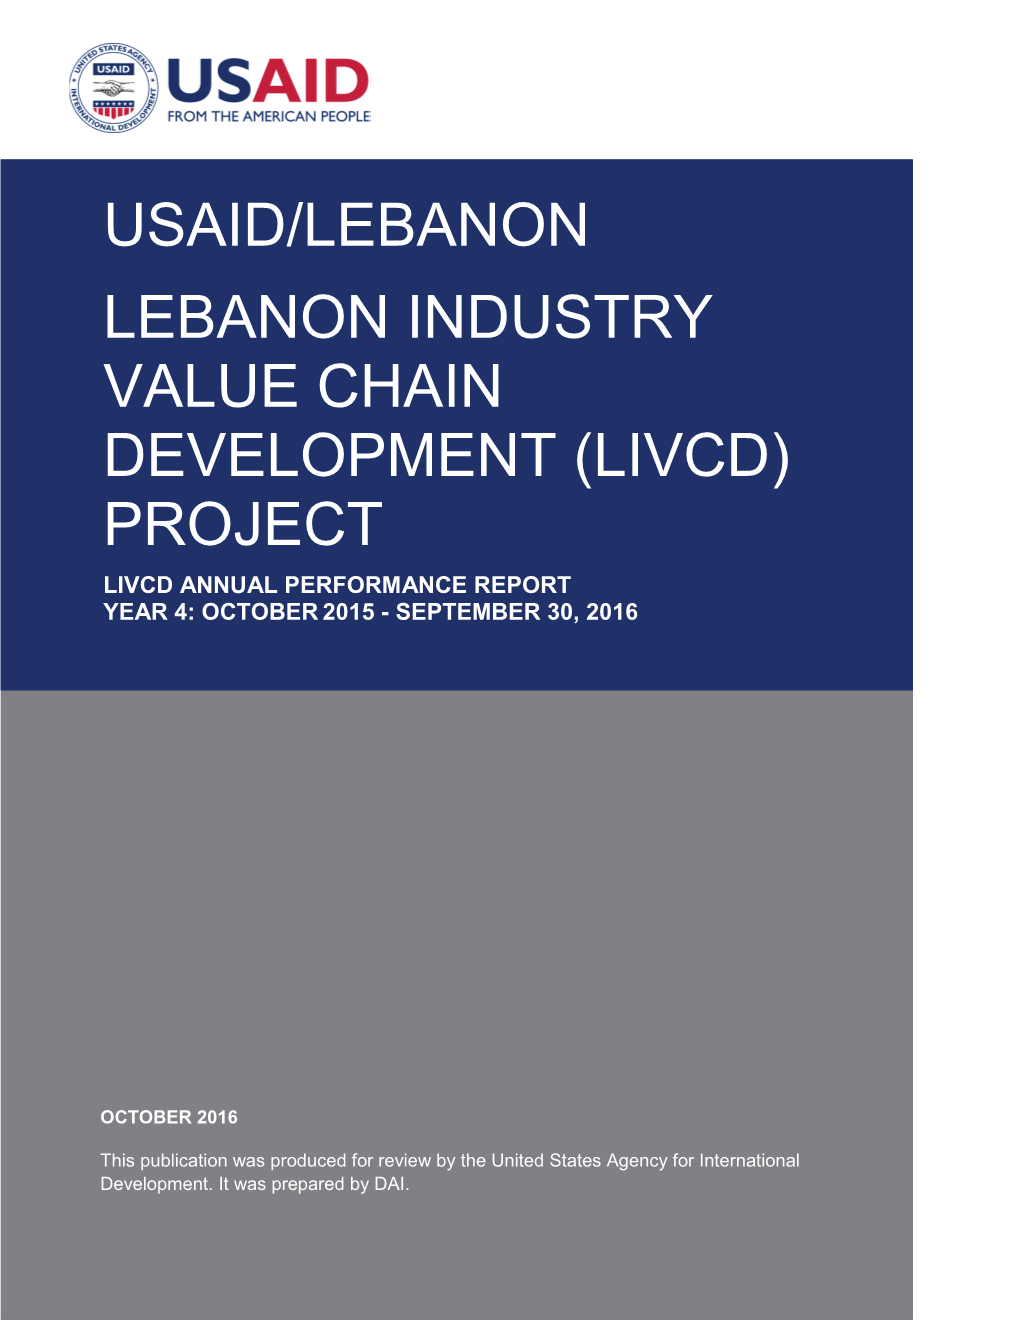 Project Livcd Annual Performance Report Year 4: October 2015 - September 30, 2016